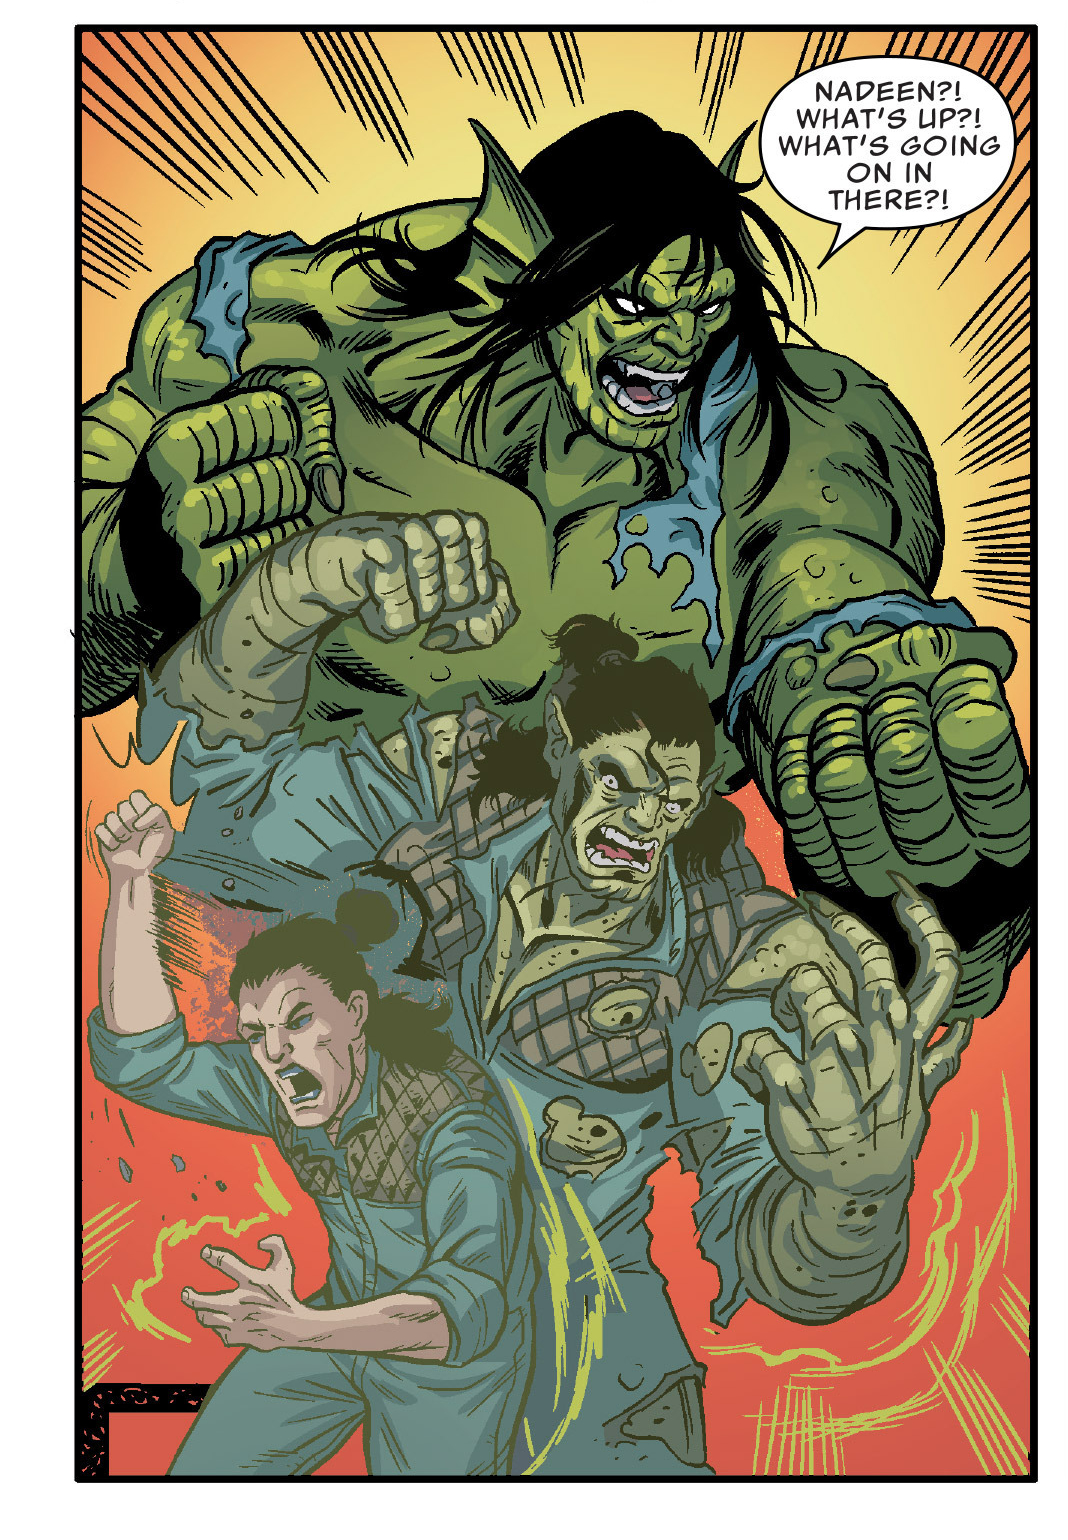 Male Transformations: Marvel Comics Round-Up (Hulk, Monster, and